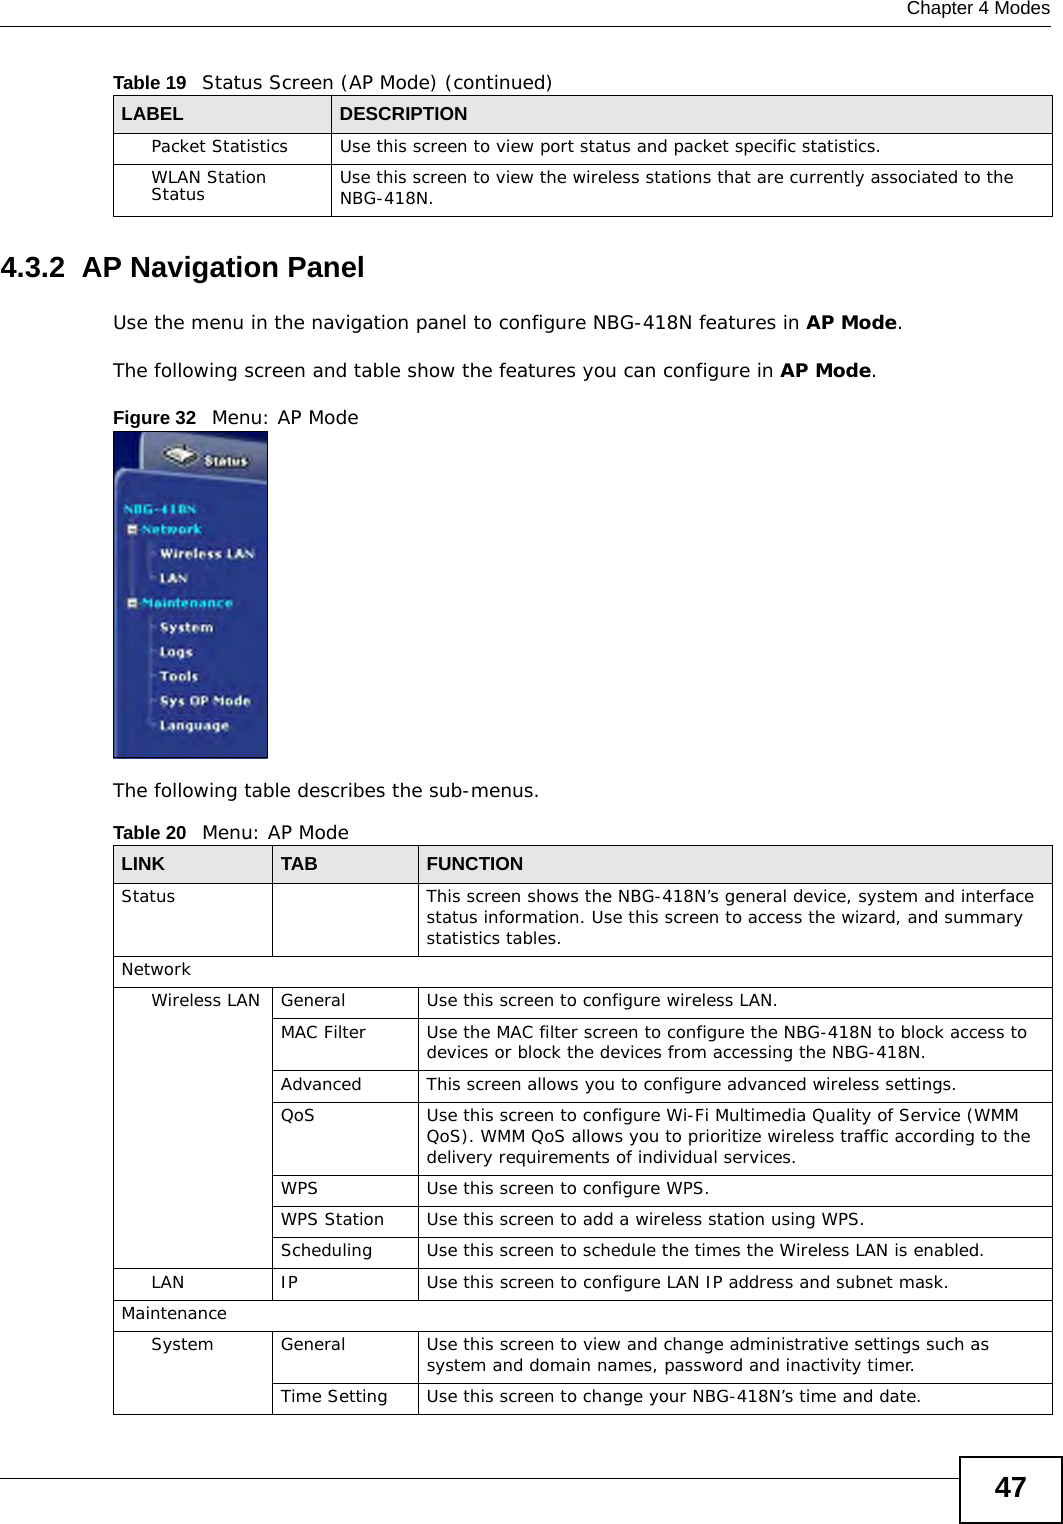  Chapter 4 Modes474.3.2  AP Navigation PanelUse the menu in the navigation panel to configure NBG-418N features in AP Mode.The following screen and table show the features you can configure in AP Mode.Figure 32   Menu: AP ModeThe following table describes the sub-menus.Packet Statistics Use this screen to view port status and packet specific statistics.WLAN Station Status Use this screen to view the wireless stations that are currently associated to the NBG-418N.Table 19   Status Screen (AP Mode) (continued)LABEL DESCRIPTIONTable 20   Menu: AP ModeLINK TABFUNCTIONStatus This screen shows the NBG-418N’s general device, system and interface status information. Use this screen to access the wizard, and summary statistics tables.NetworkWireless LAN General Use this screen to configure wireless LAN.MAC Filter Use the MAC filter screen to configure the NBG-418N to block access to devices or block the devices from accessing the NBG-418N.Advanced This screen allows you to configure advanced wireless settings.QoS Use this screen to configure Wi-Fi Multimedia Quality of Service (WMM QoS). WMM QoS allows you to prioritize wireless traffic according to the delivery requirements of individual services.WPS Use this screen to configure WPS.WPS Station Use this screen to add a wireless station using WPS.Scheduling Use this screen to schedule the times the Wireless LAN is enabled.LAN IP Use this screen to configure LAN IP address and subnet mask.MaintenanceSystem General Use this screen to view and change administrative settings such as system and domain names, password and inactivity timer.Time Setting Use this screen to change your NBG-418N’s time and date.